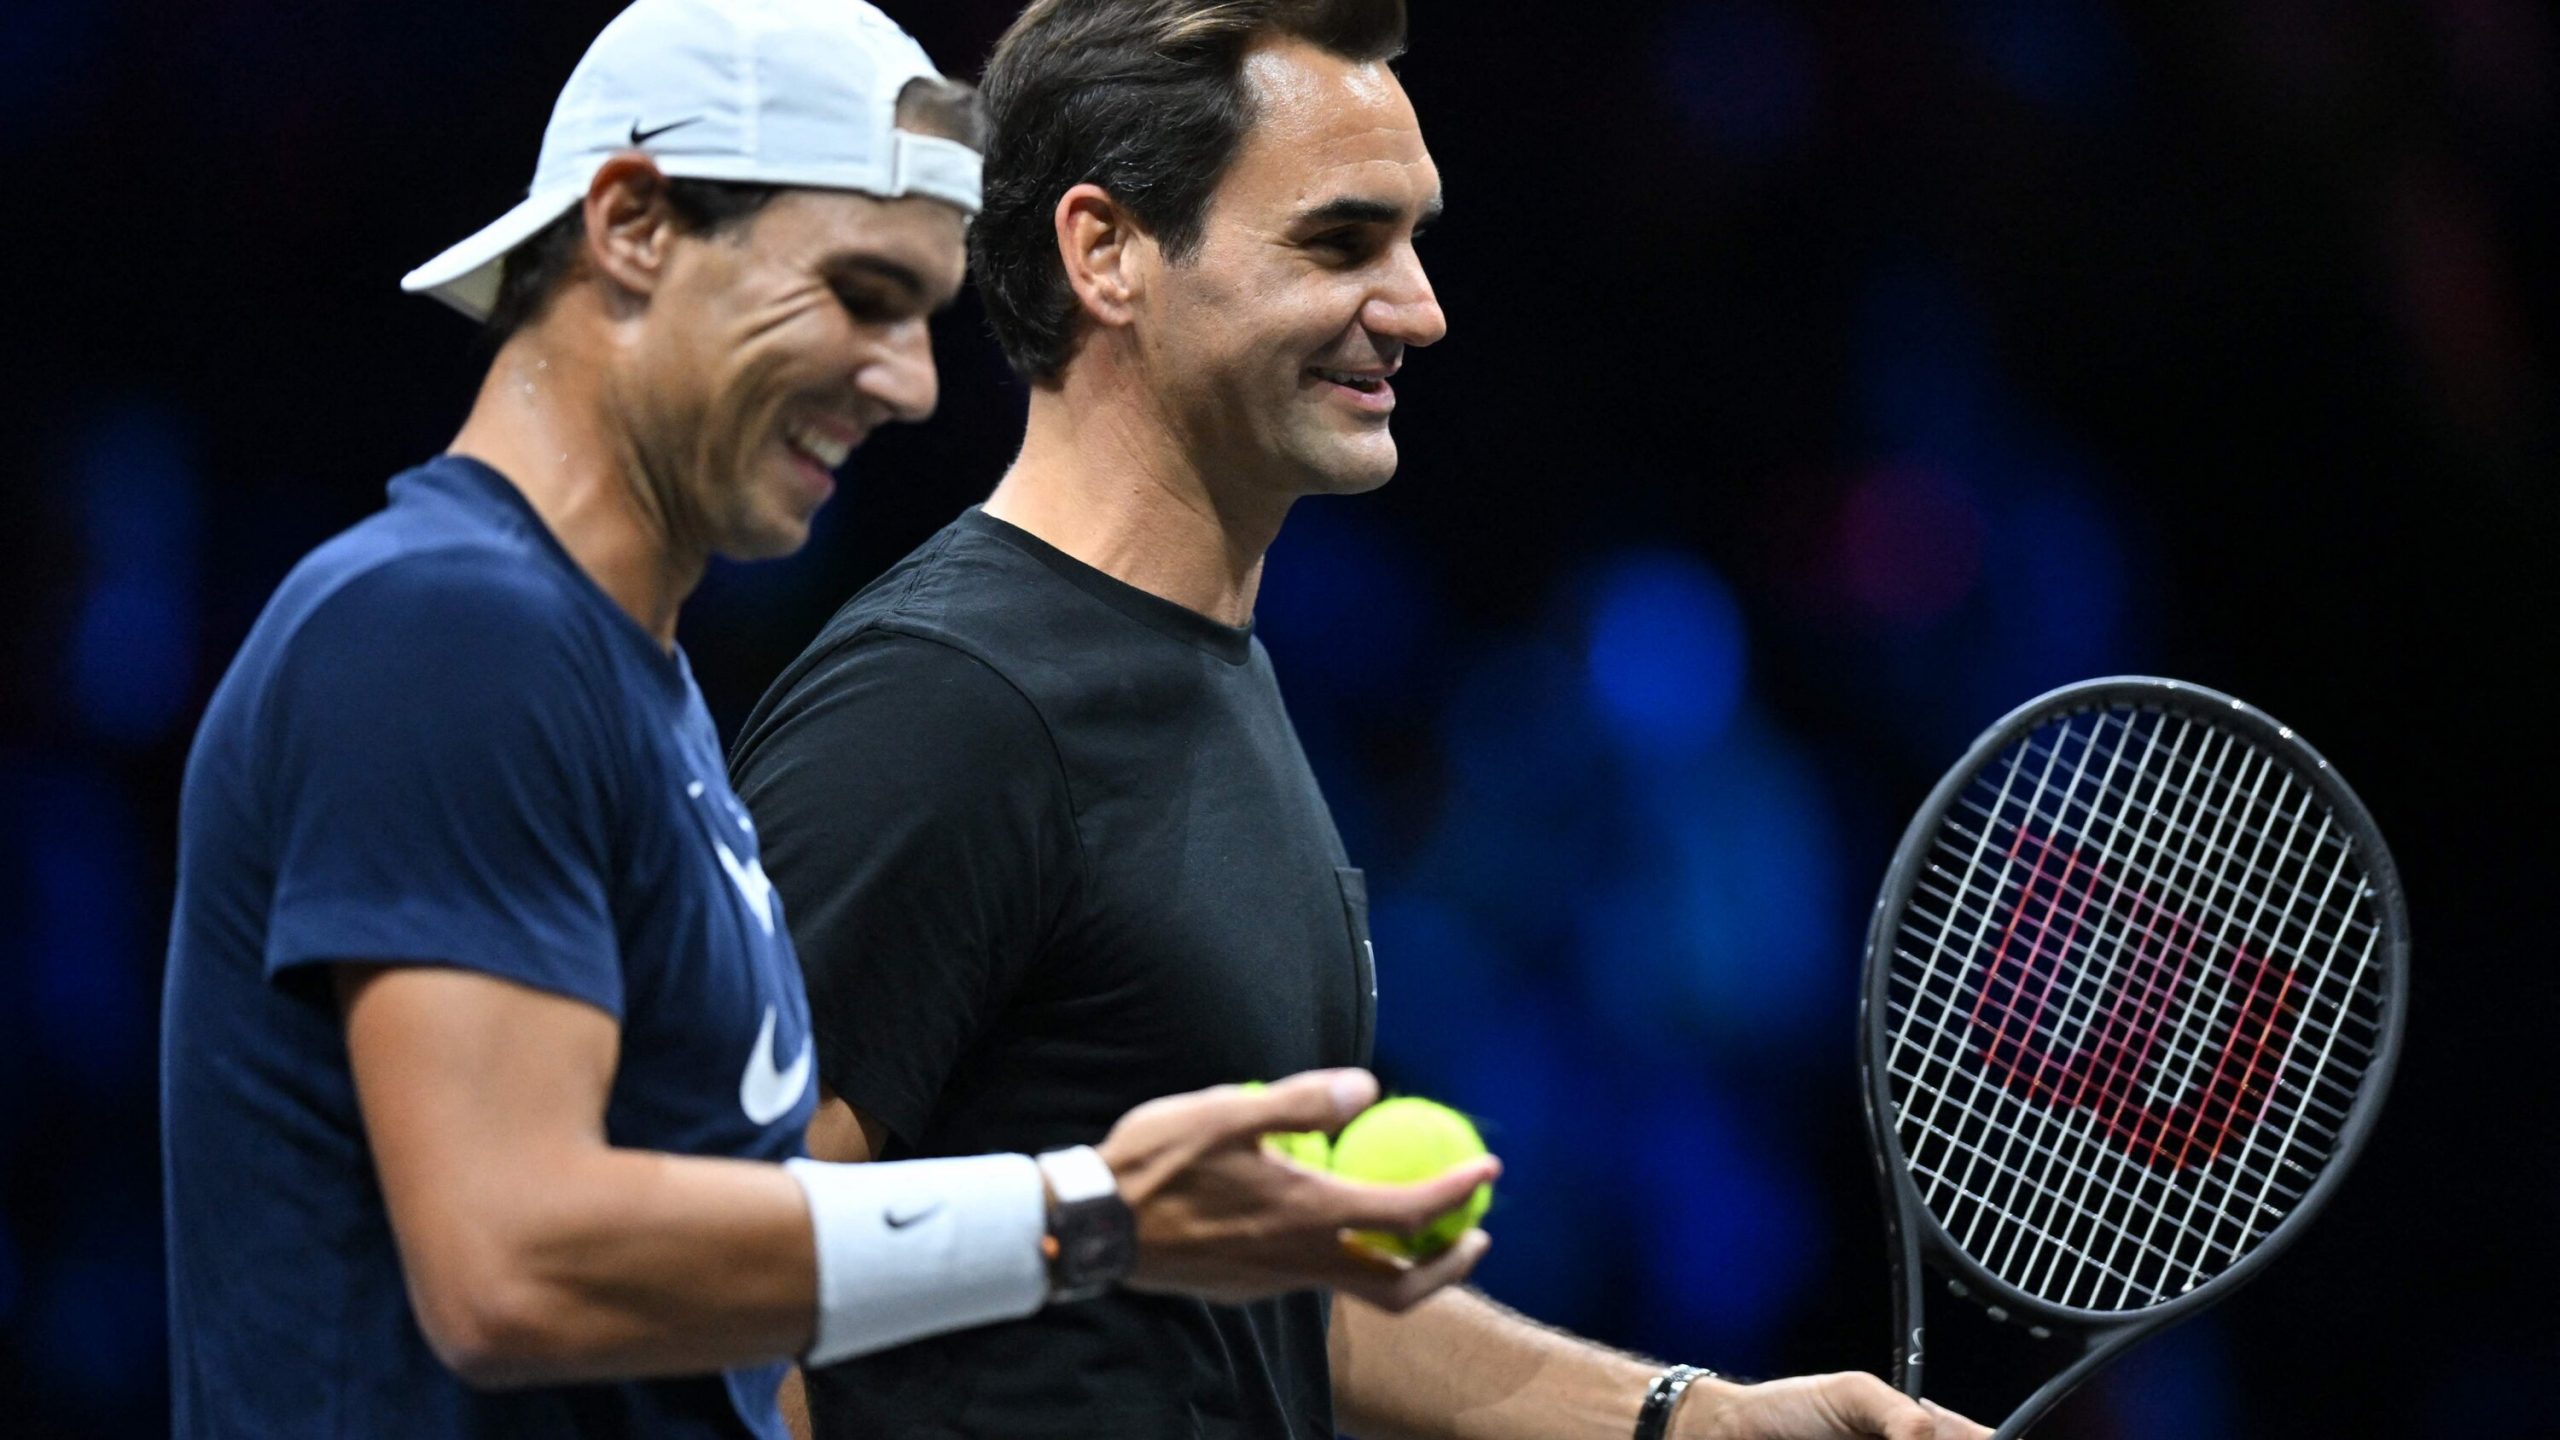 Federer to team with Nadal for his last professional match